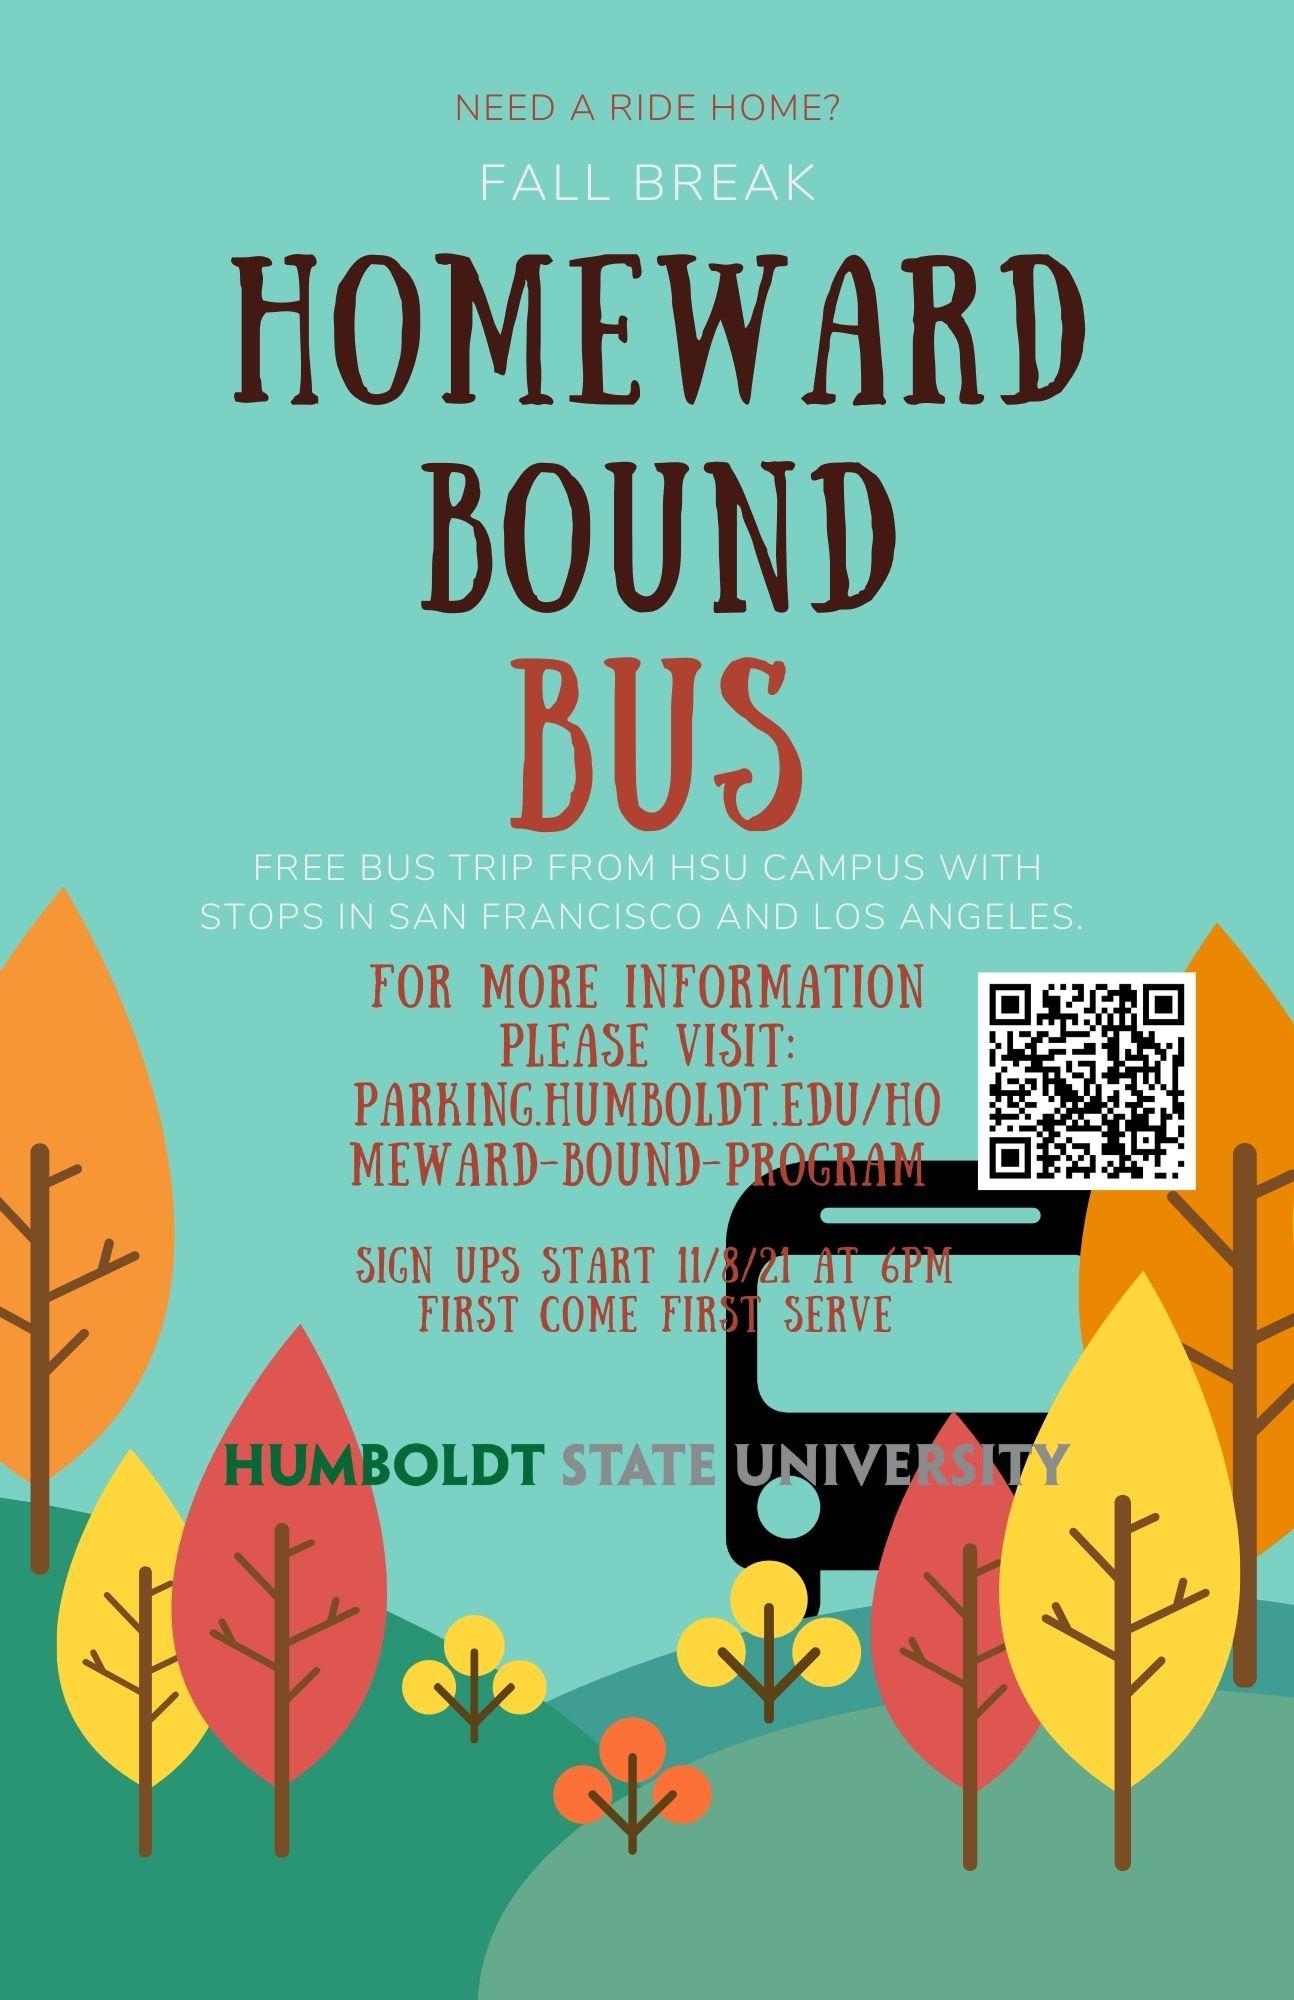 Flyer for homeward bound bus. leaves and a bus on a blue background. Text reads: Need a ride home? Fall Break. Homeward Bound Bus. Free Bus trip from Humboldt campus with stops in san francisco and los angeles. For more info please visit parking.humboldt.edu